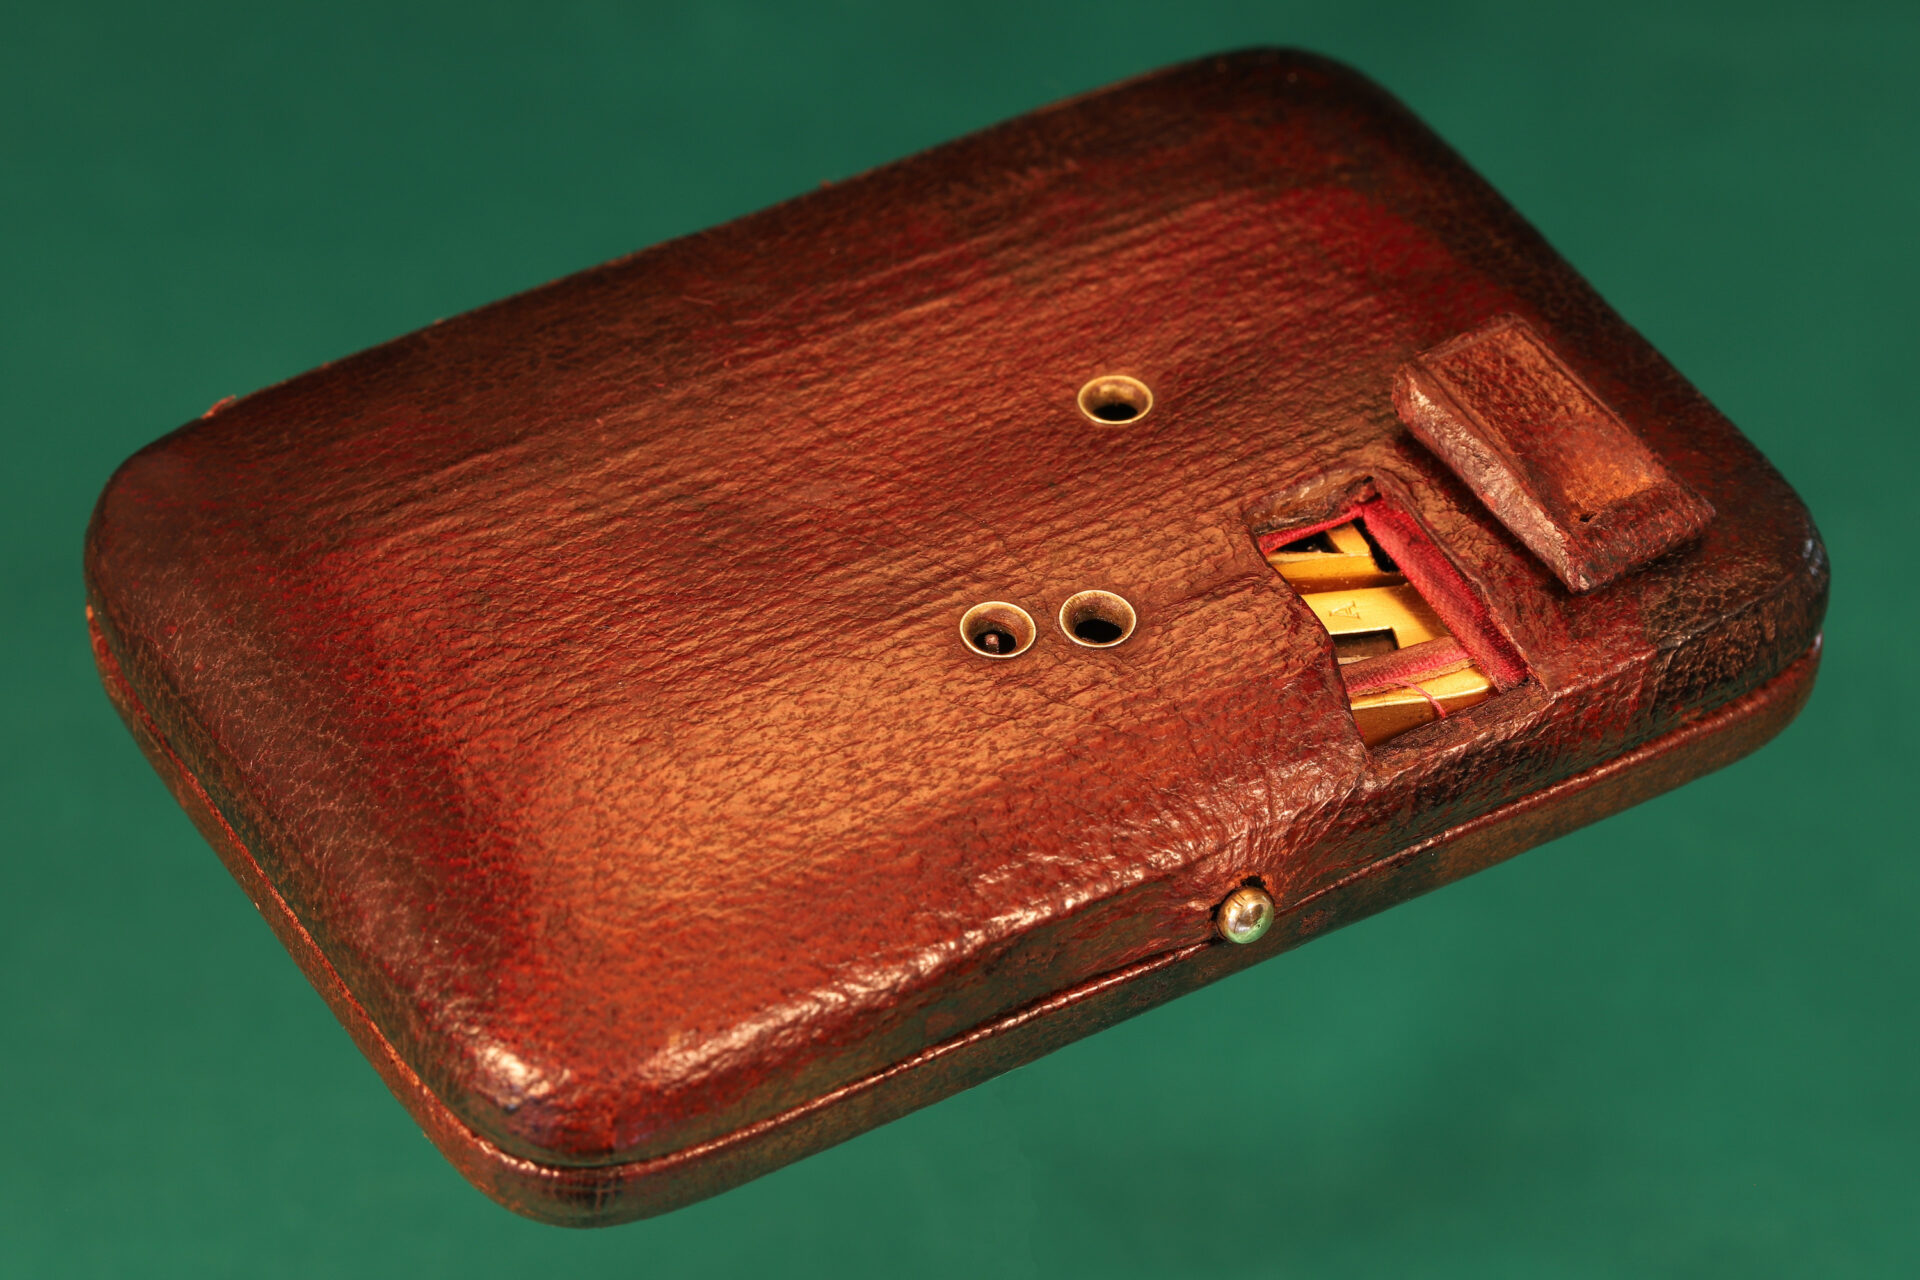 Underside of travel case for French Travel Compendium Retailed by Hazebroucq c1900